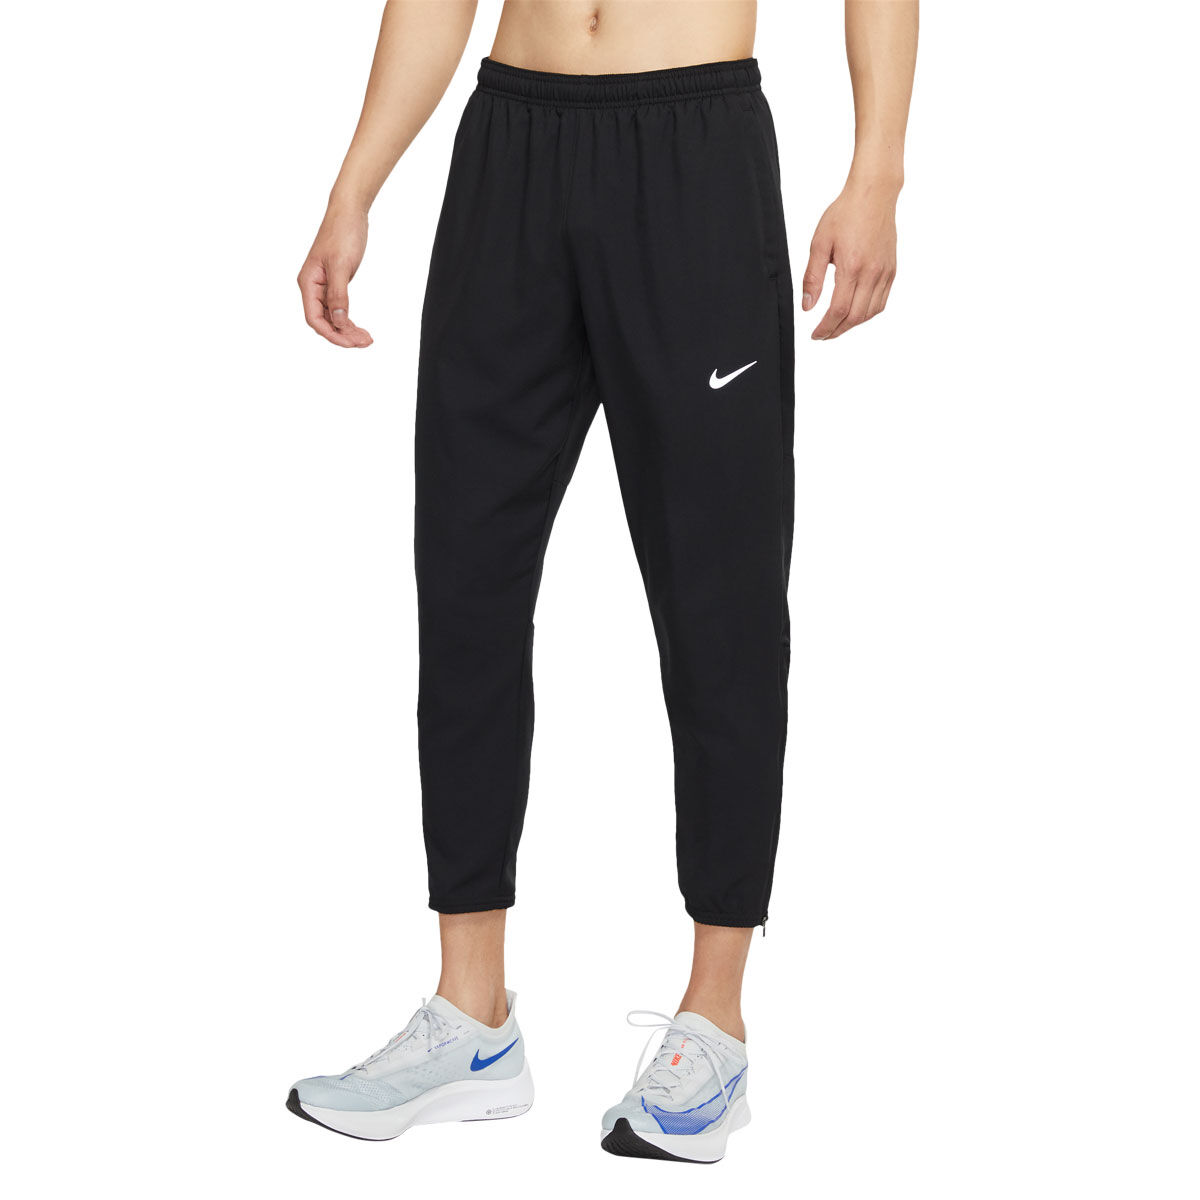 Nike Pants Womens Small Gray Dri-Fit Get Fit Training Athletic Comfort  Ladies